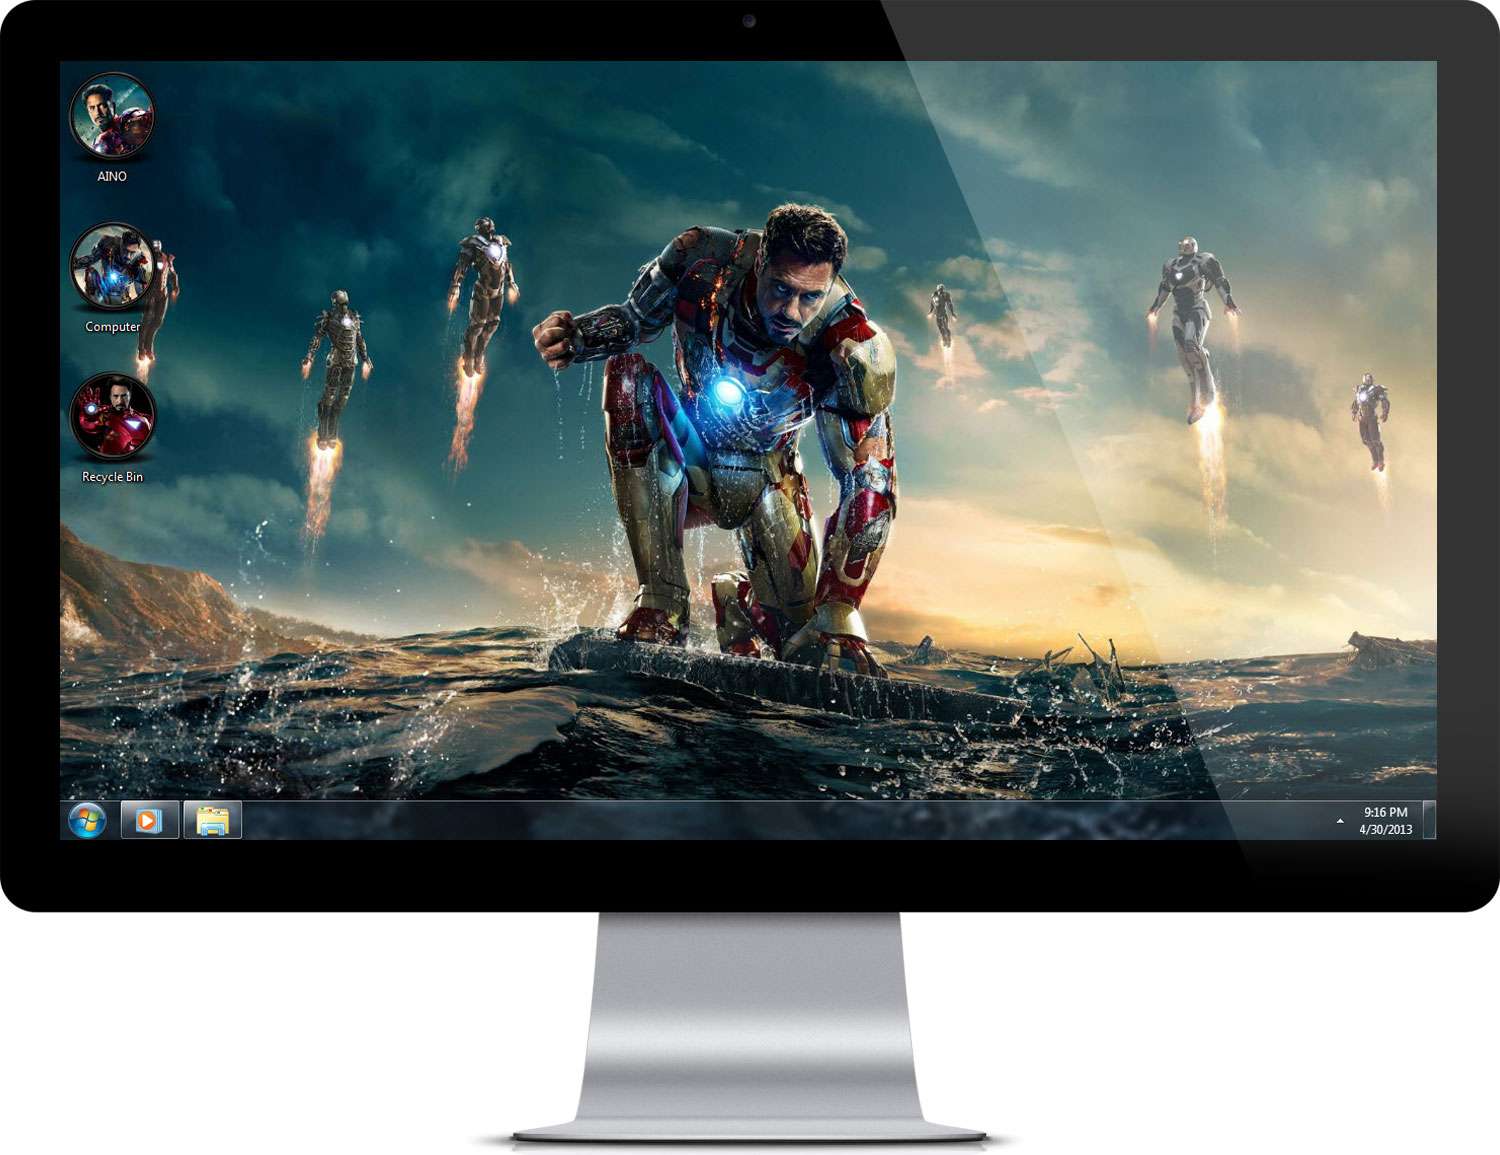 Iron Man Exclusive Theme For Windows 7 and 8 With 20+ Wallpapers